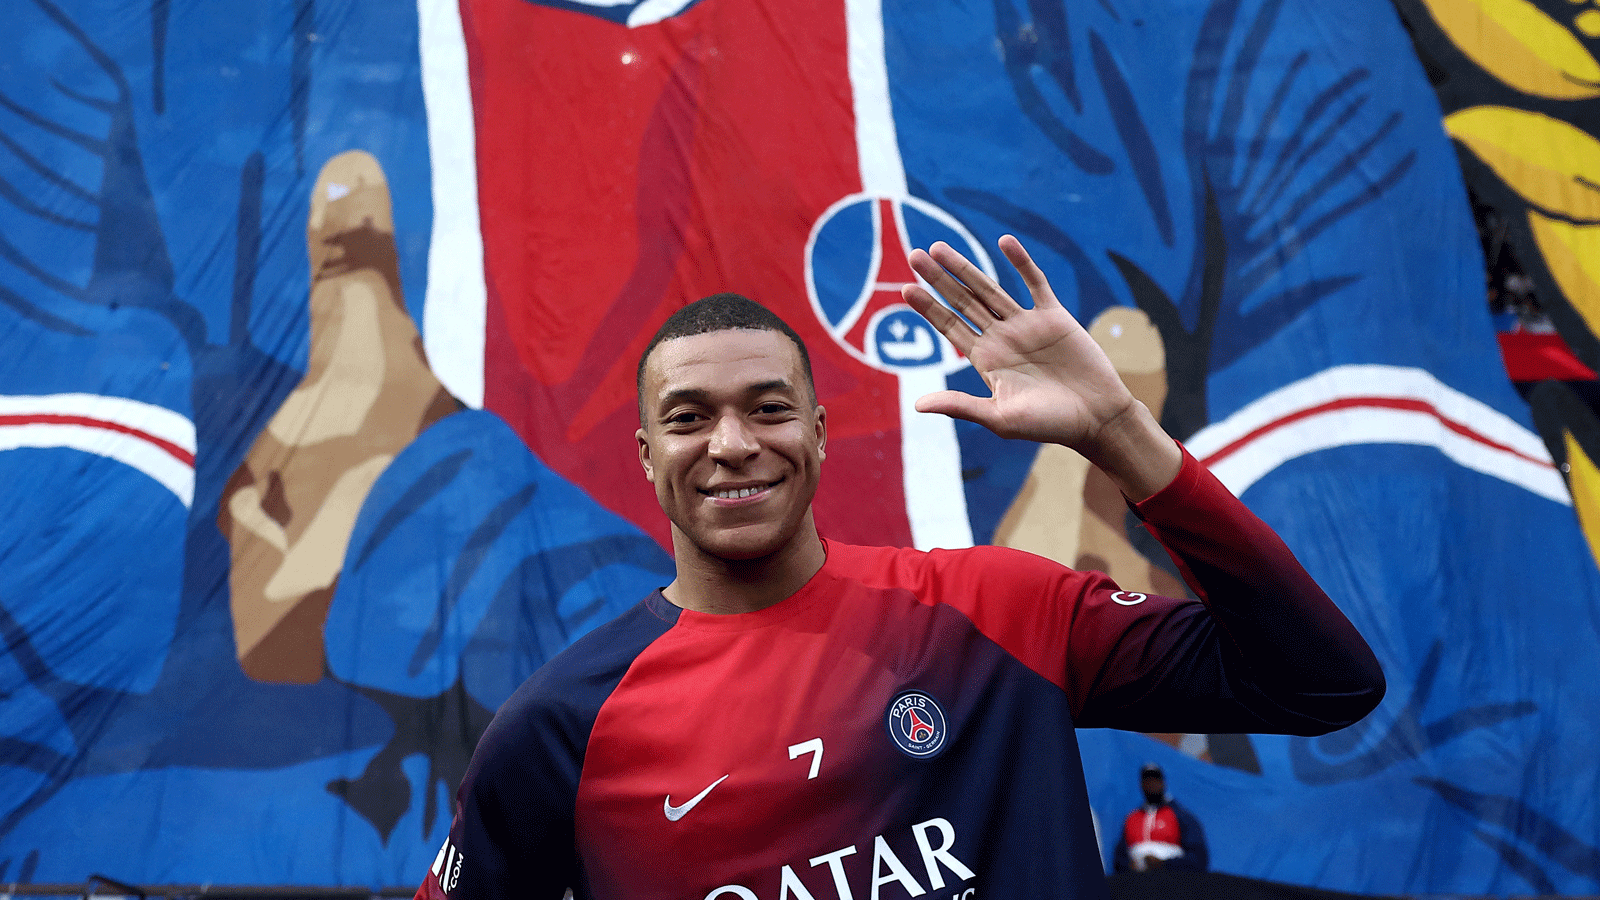 PSG fans had mixed reactions to Kylian Mbappé’s last game at Prinzenpark